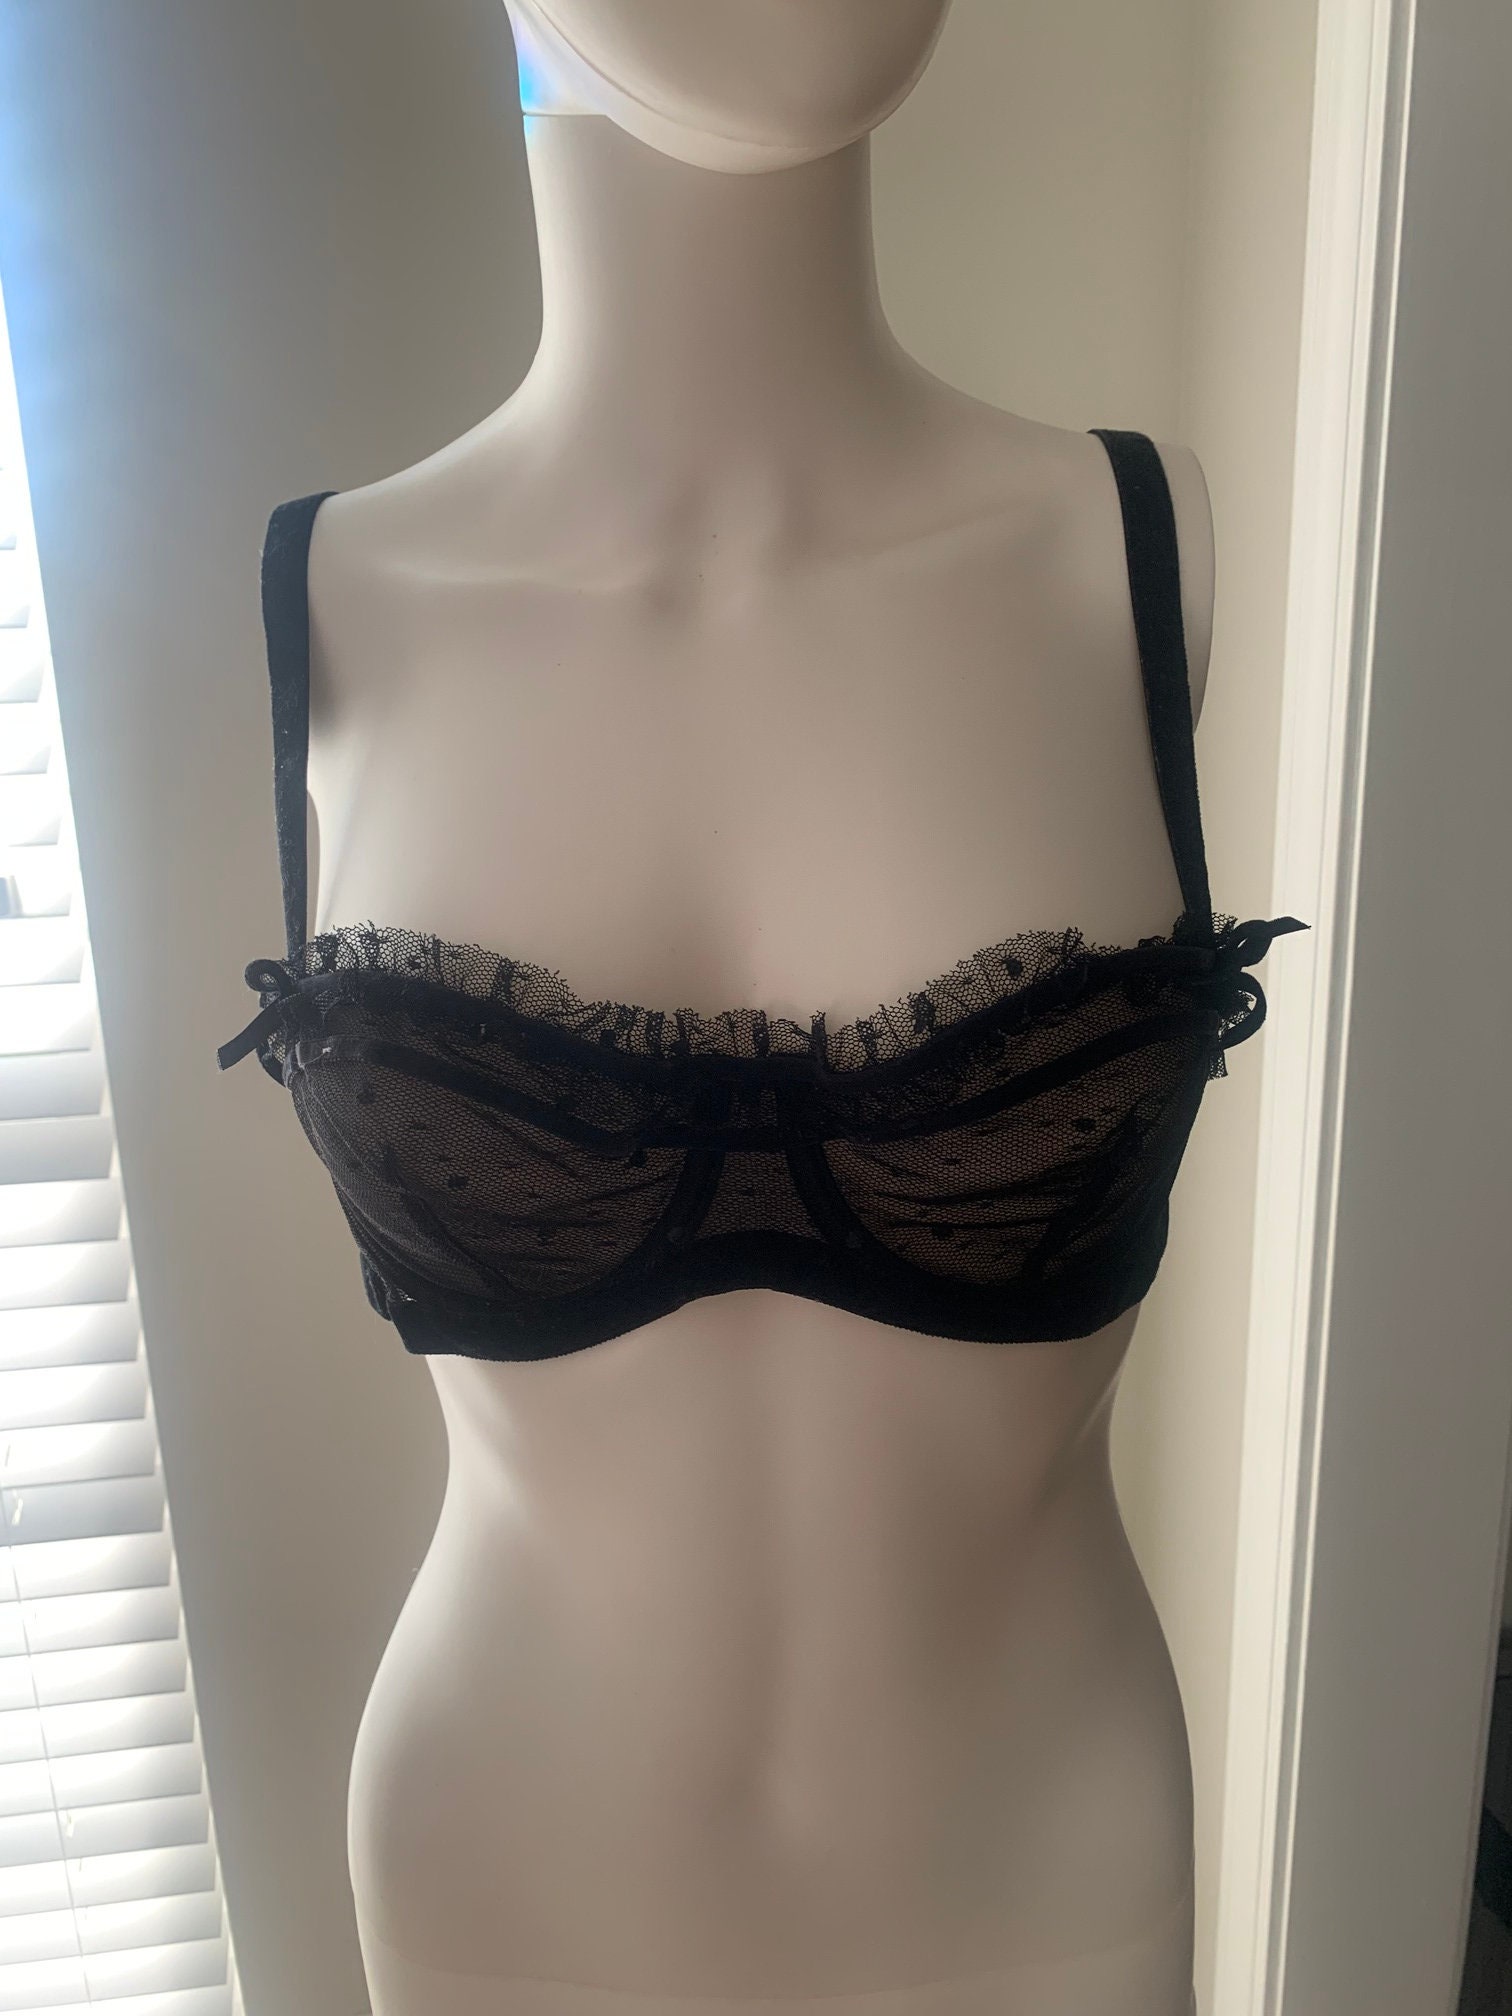 1960's Bali-lo Bow-bra, Black Lace Cup, Underwire, Hooks in Back,  Elastic/satin Adjustable Straps, Very Good Condition 